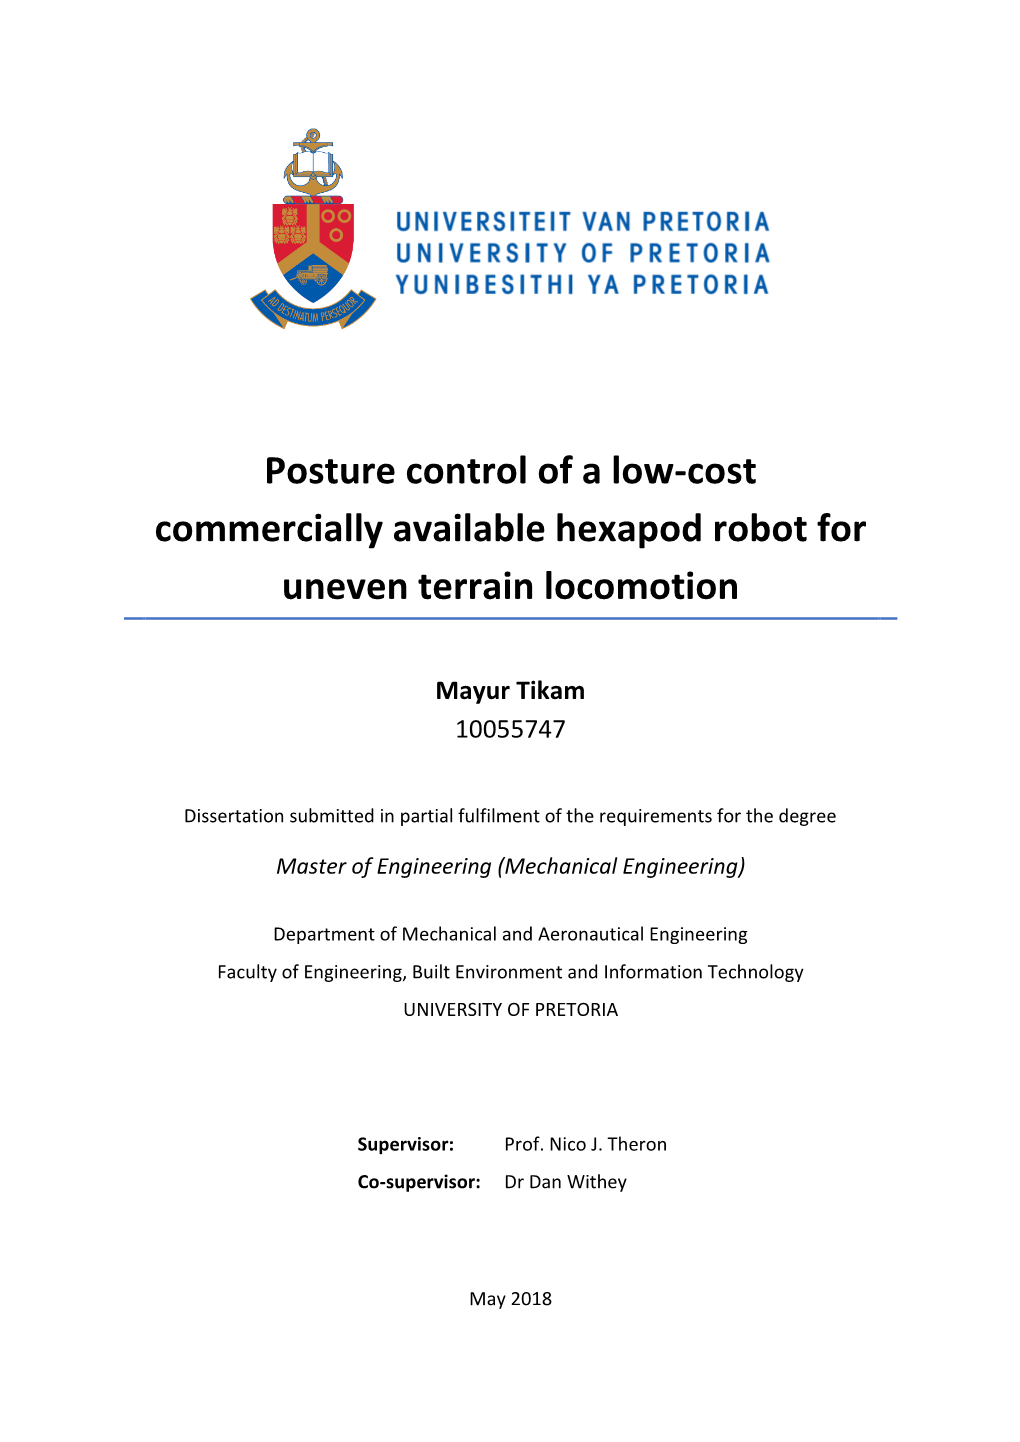 Posture Control of a Low-Cost Commercially Available Hexapod Robot for Uneven Terrain Locomotion